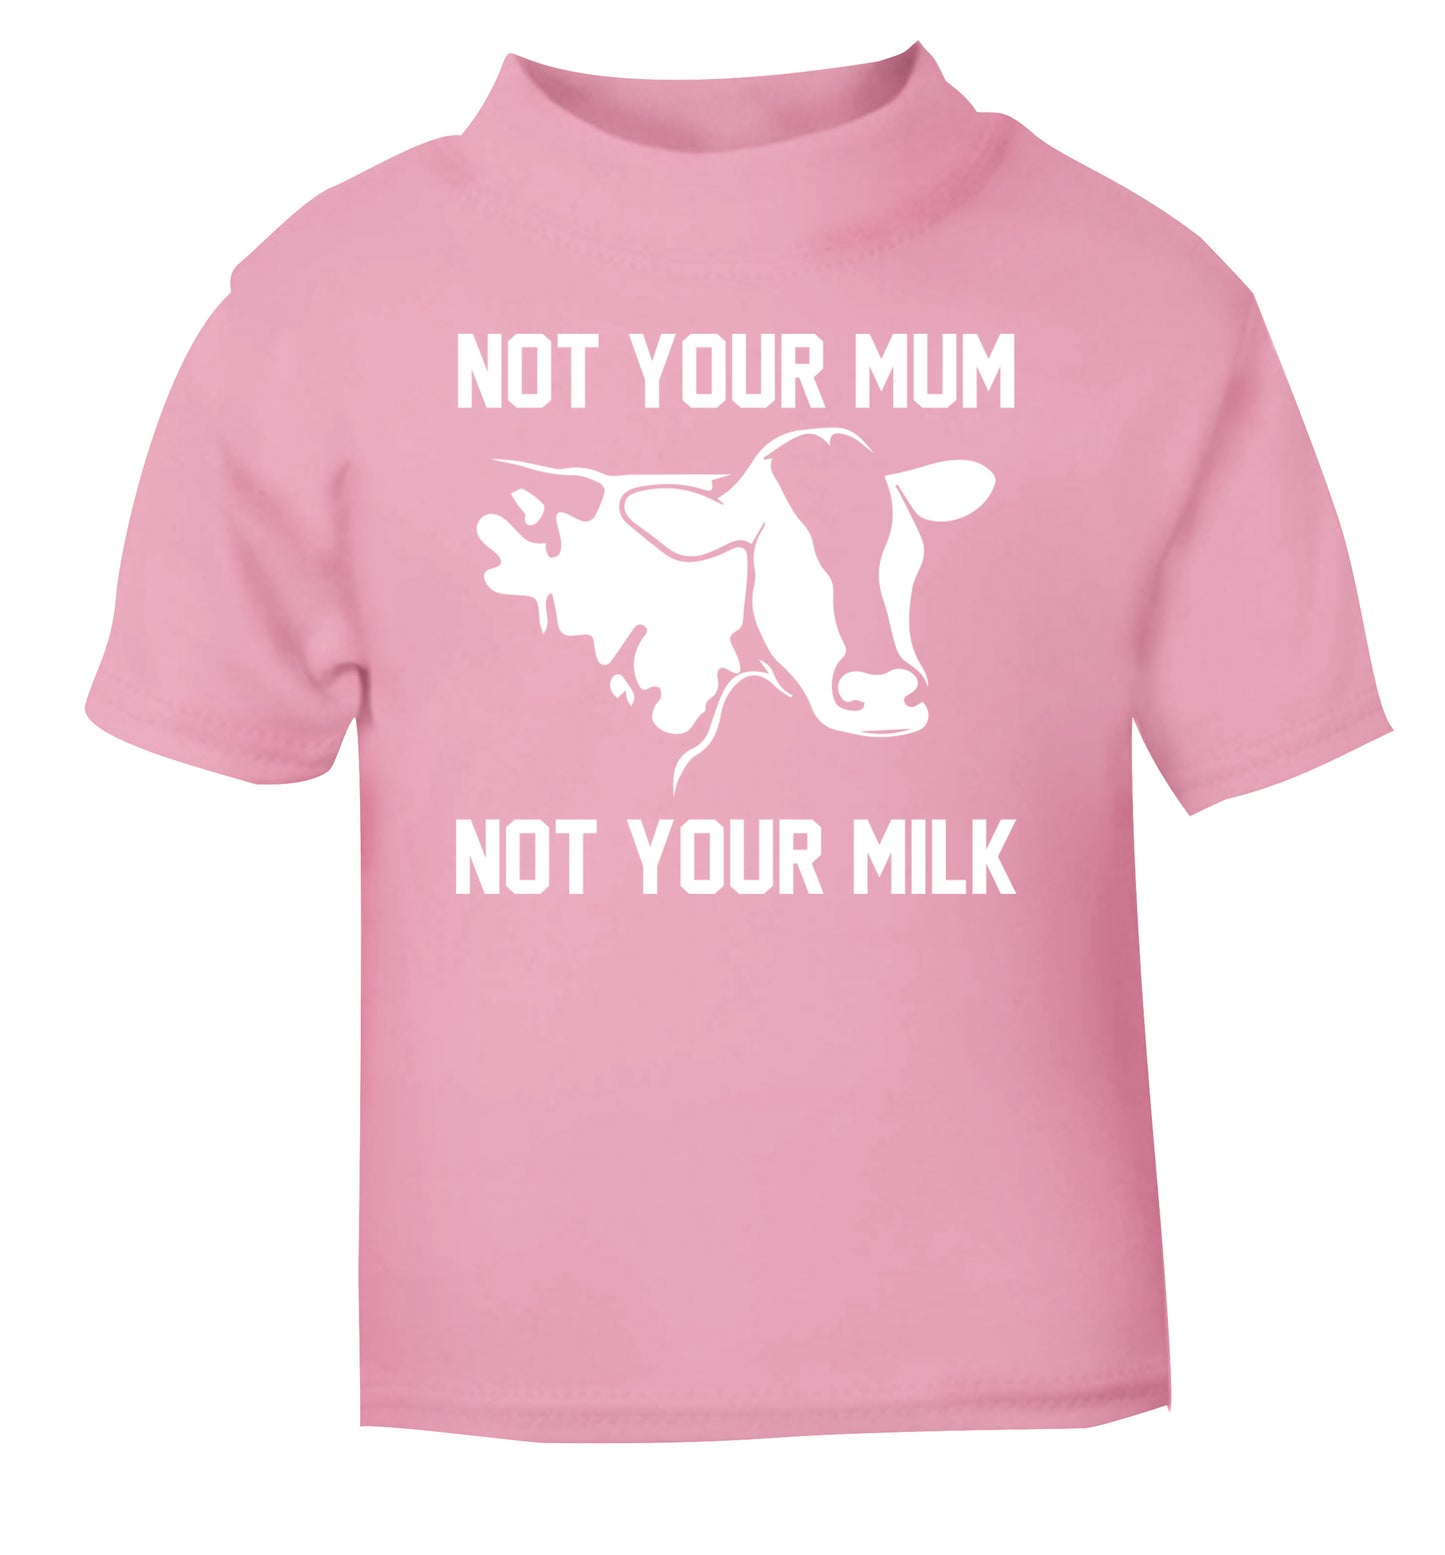 Not your mum not your milk light pink Baby Toddler Tshirt 2 Years